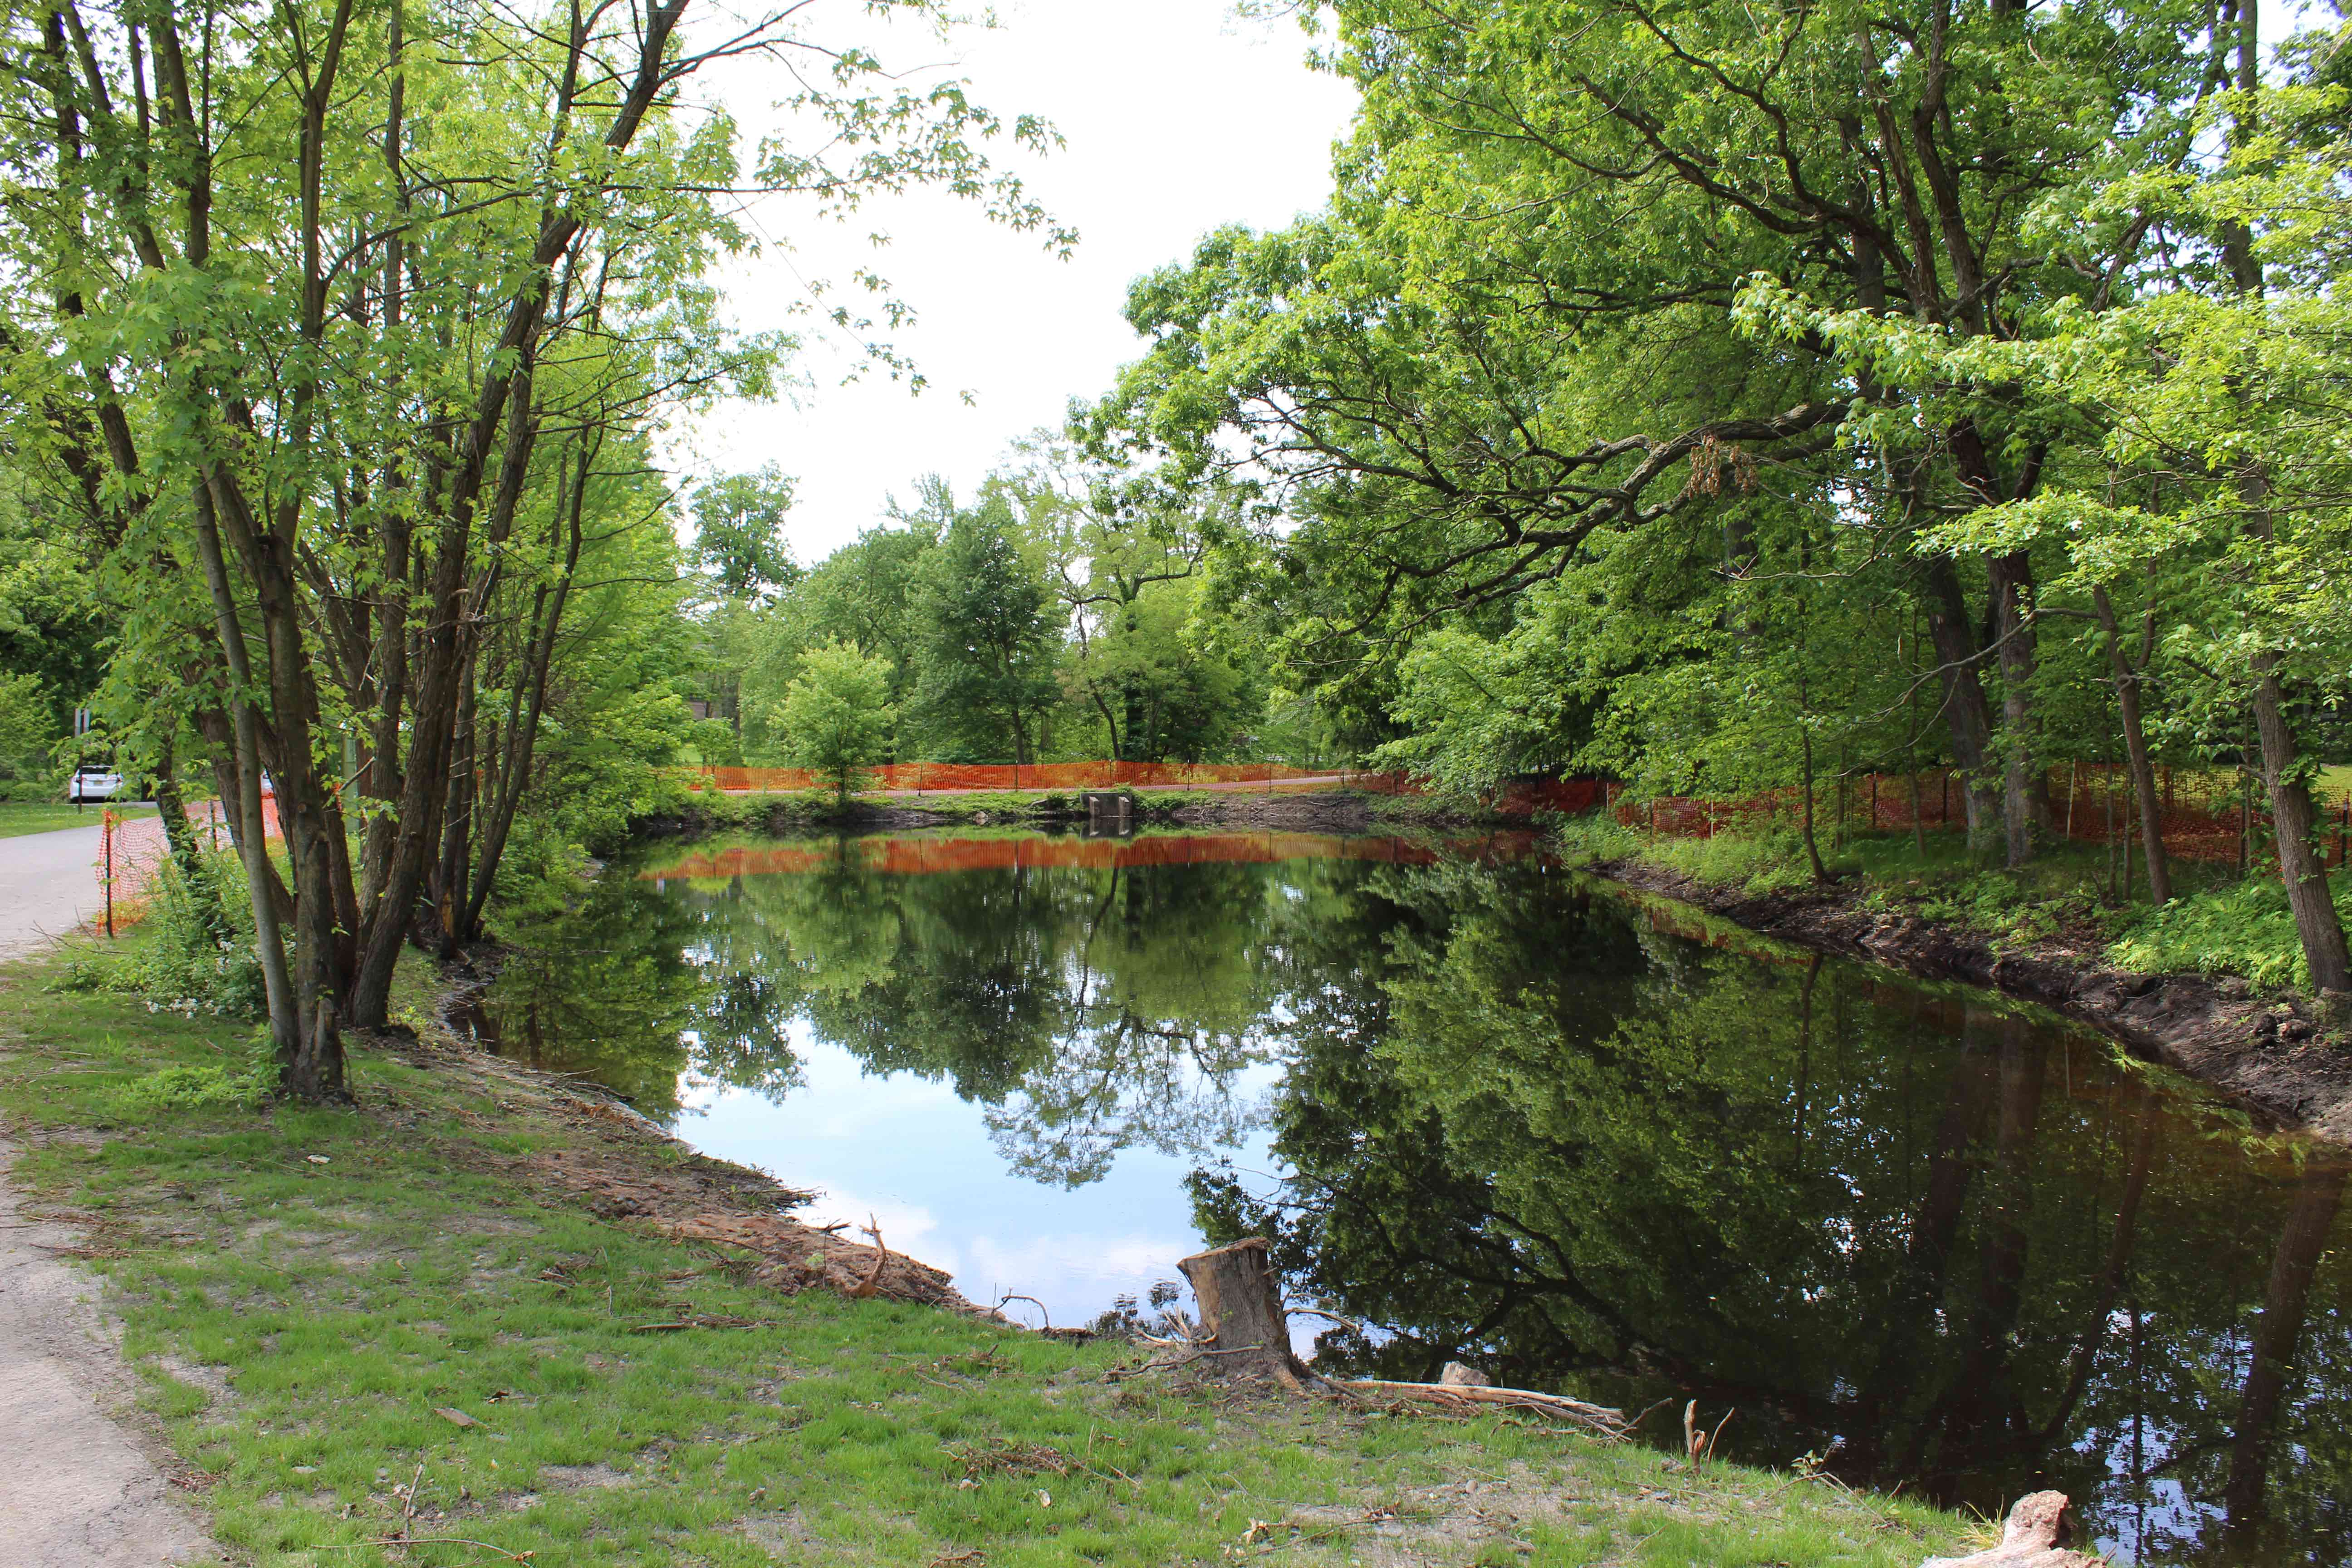 Sedimentation in Children’s Pond, which is located in Strawbridge Lake park, was negatively impacting the water quality Strawbridge Lake. In order to restore the pond and reduce impacts to Strawbridge Lake, the Moorestown Township Council awarded contracts to Princeton Hydro for the dredging and cleanup of the Children's Pond.